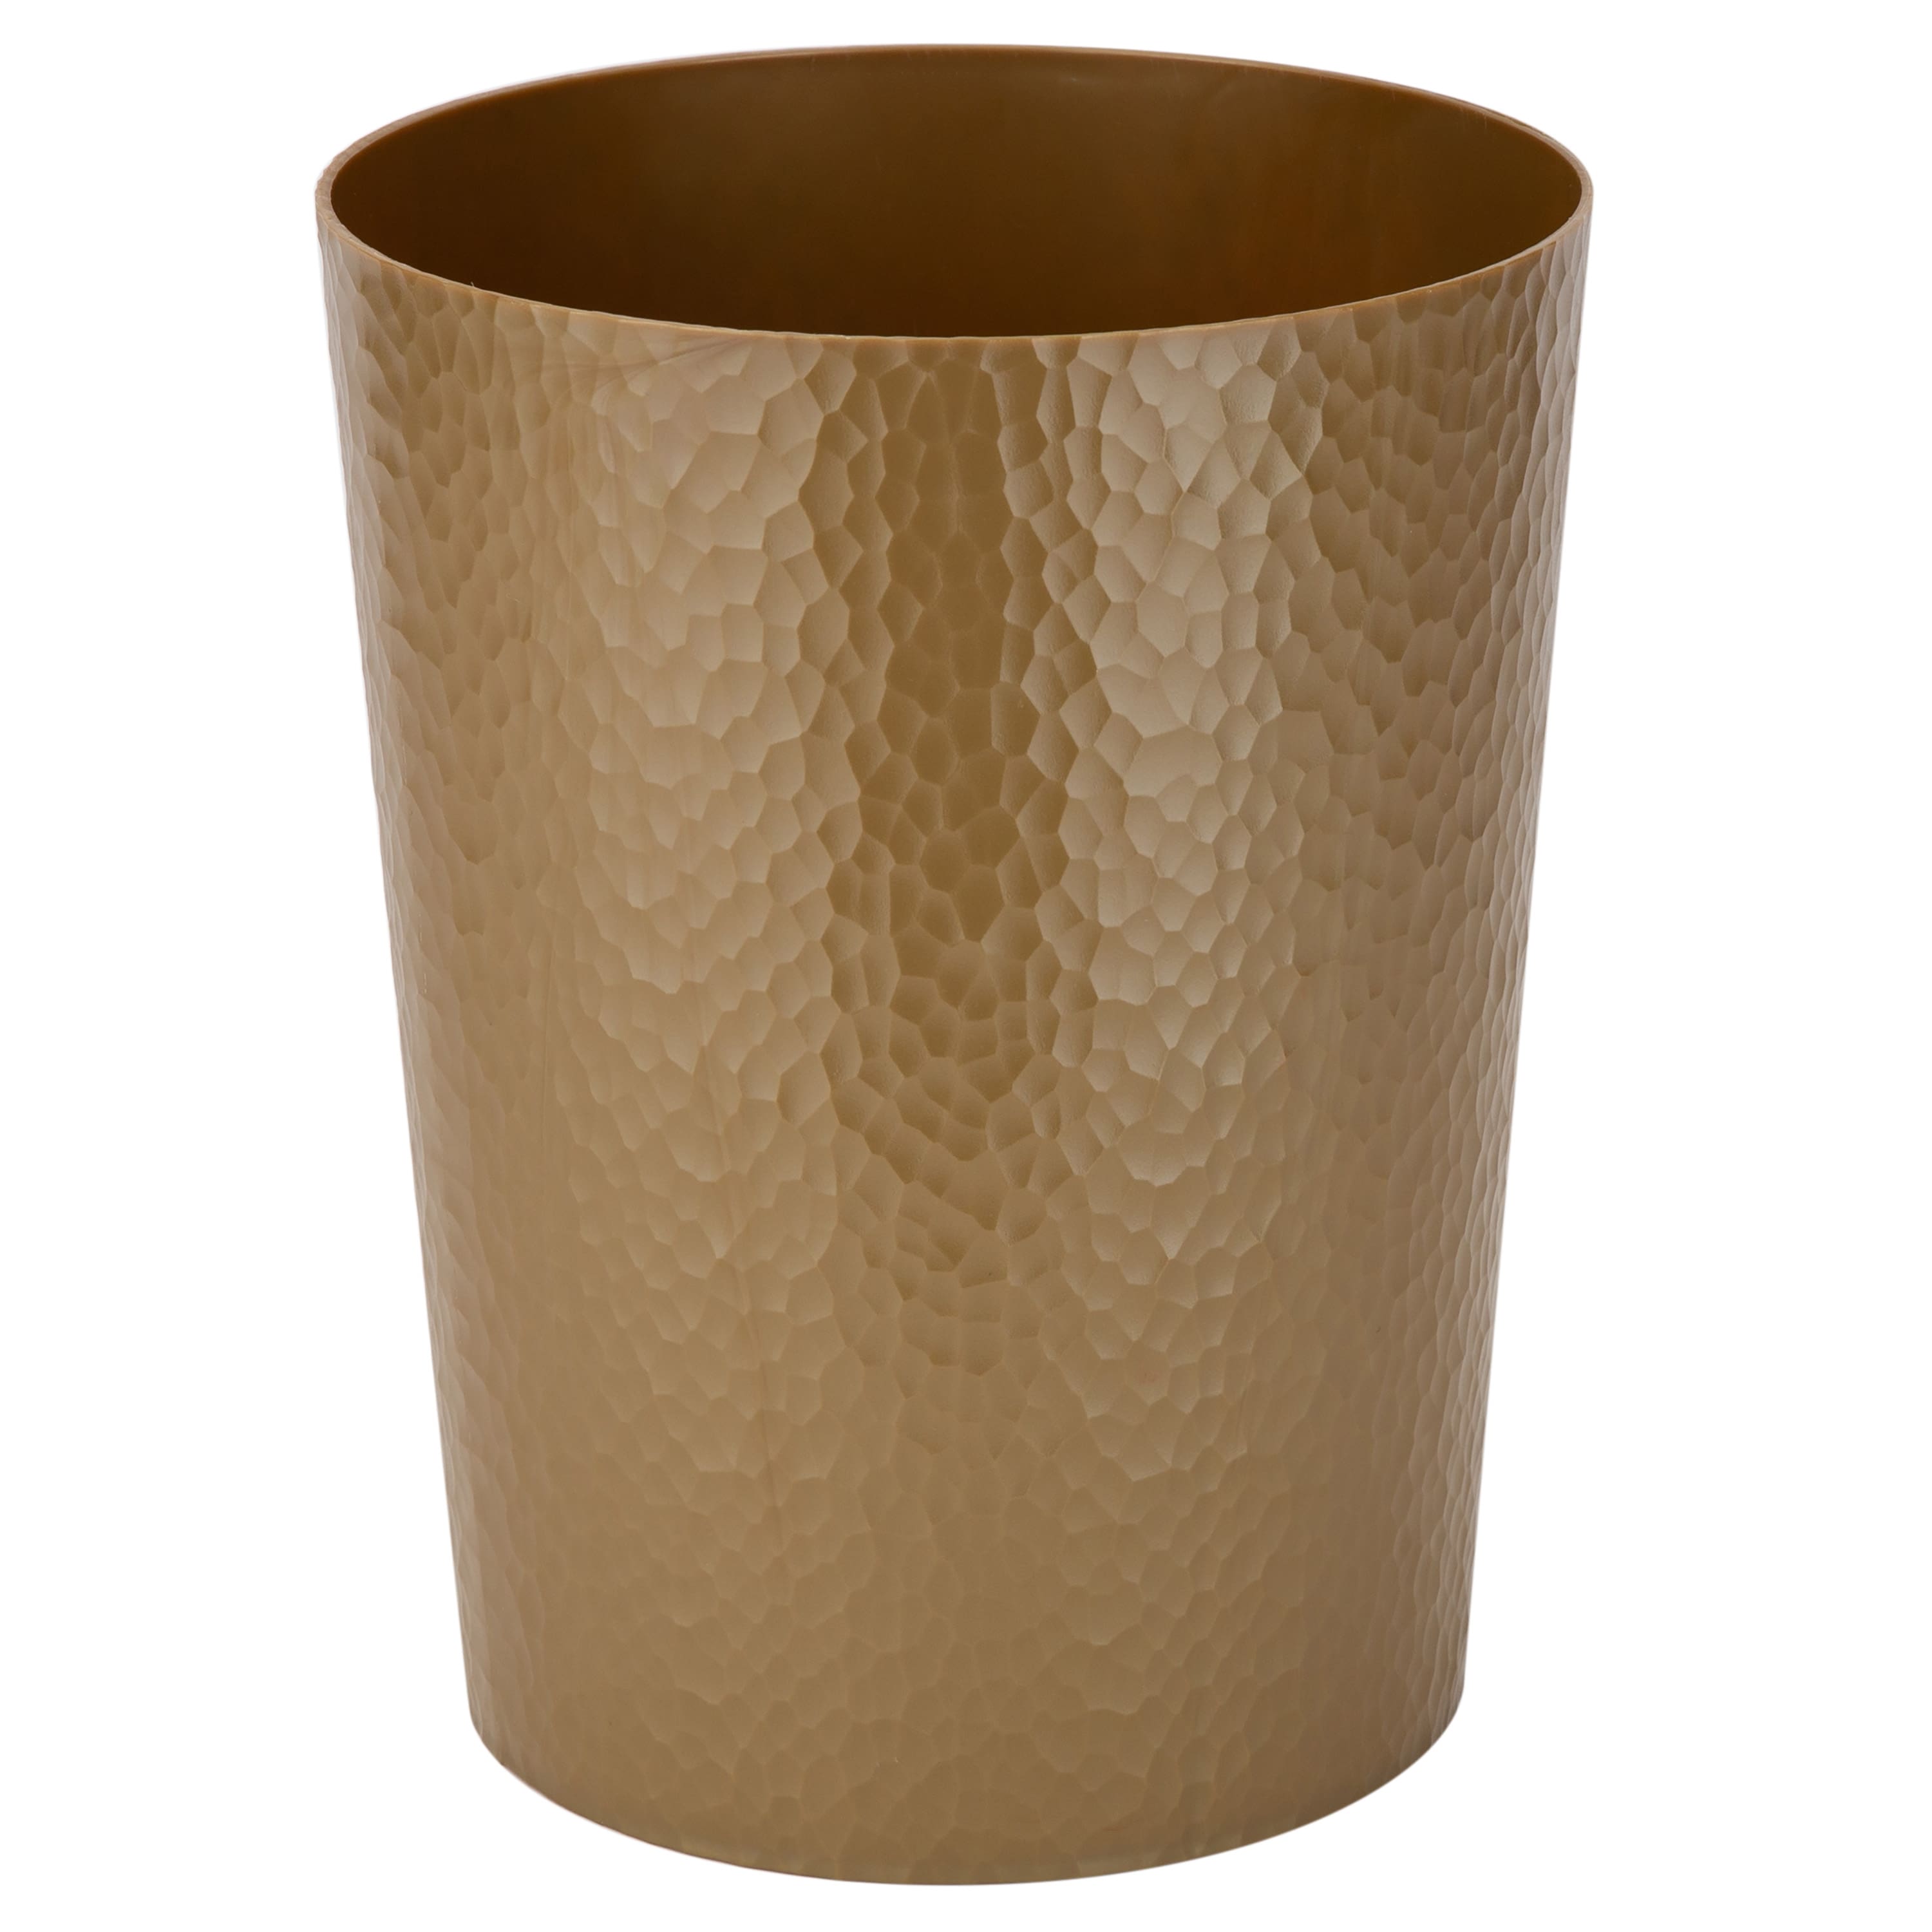 Bath Bliss Gold Hammered Textured Trash Can